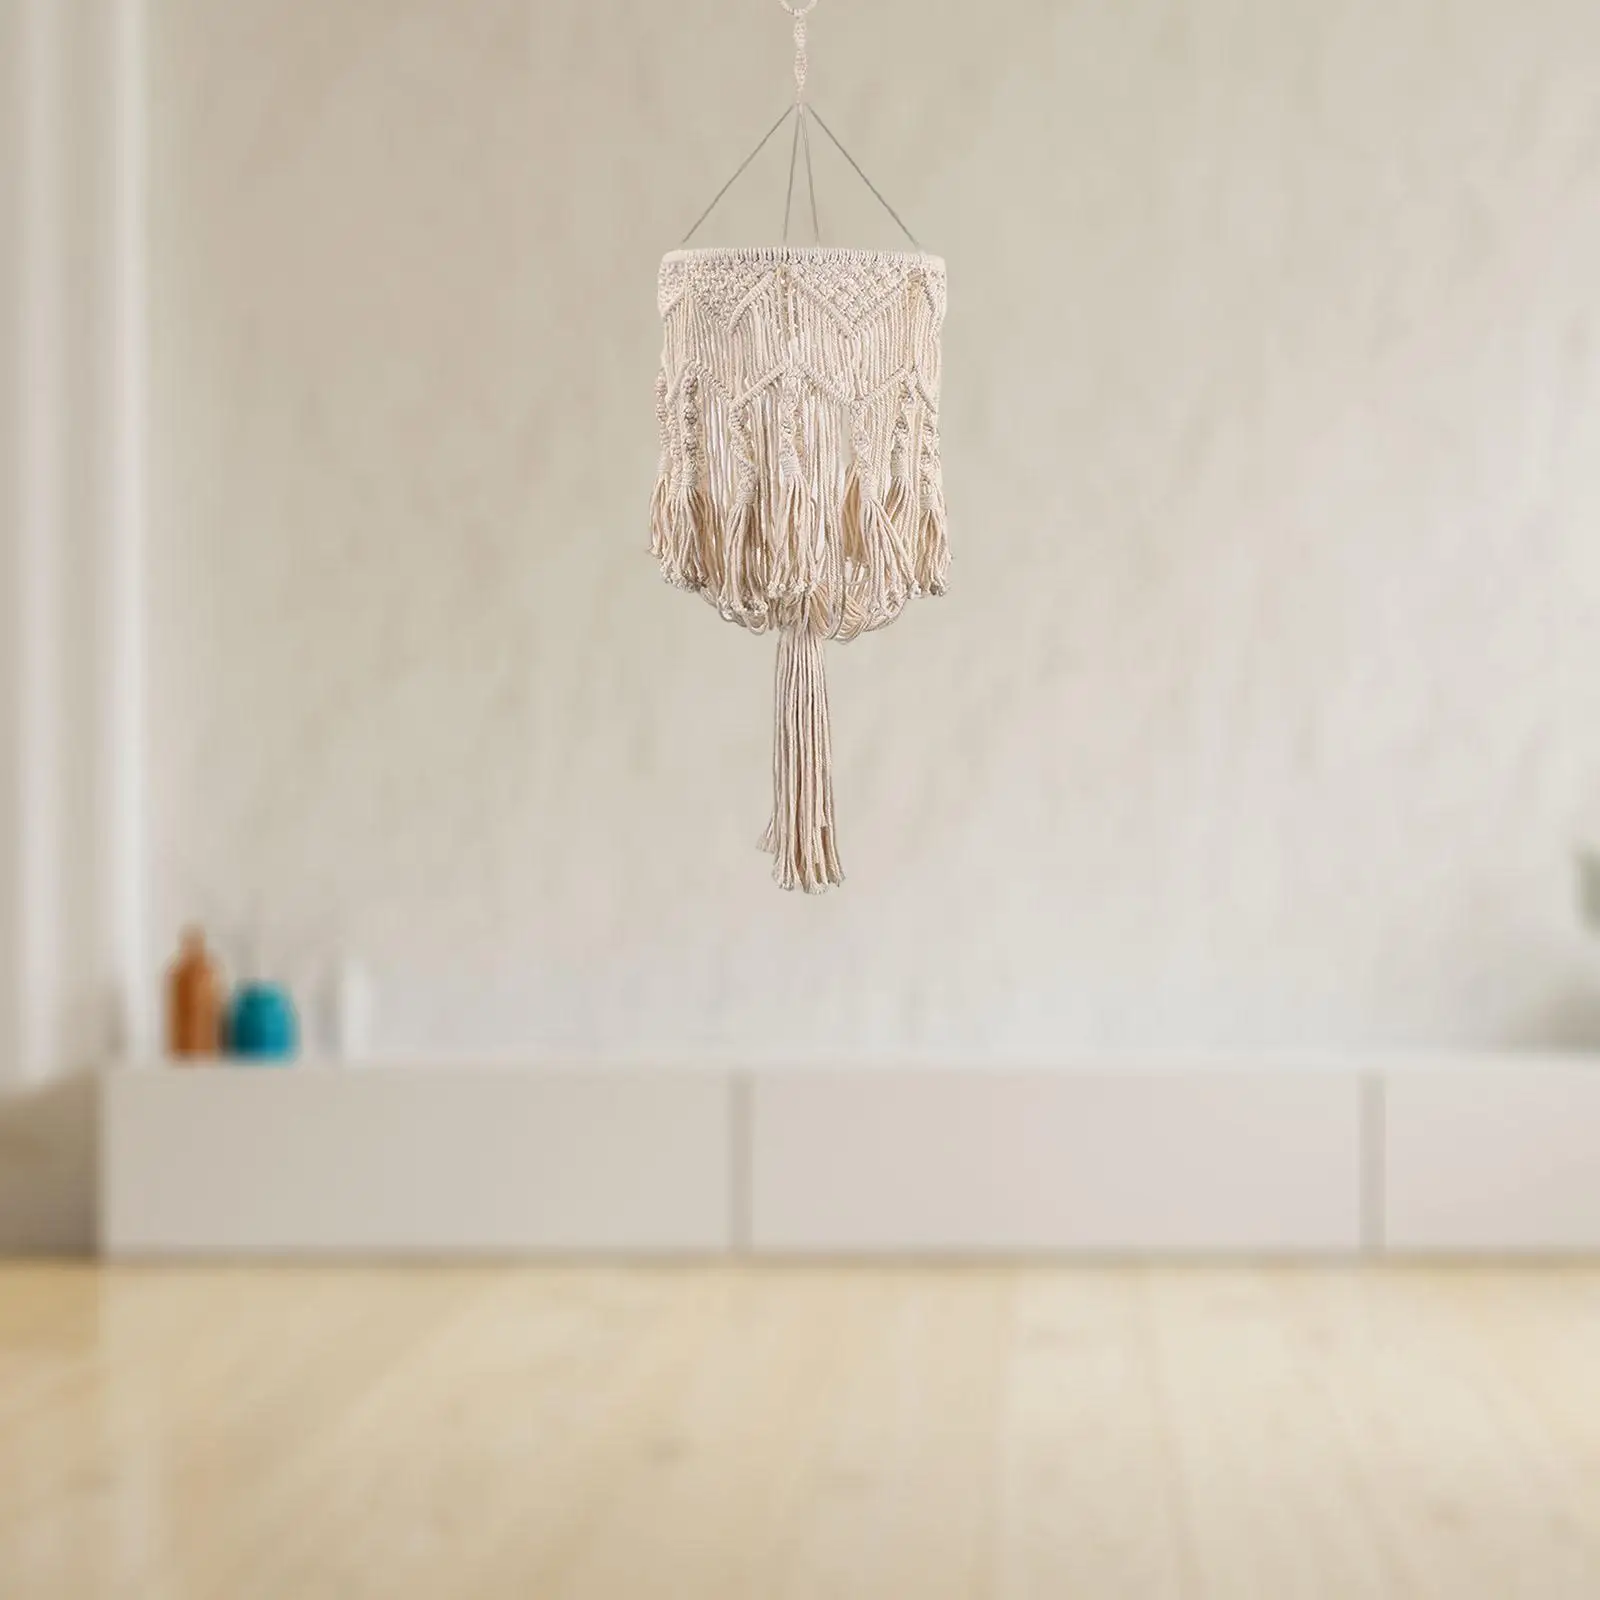 Macrame Tassel Lamp Shade Ceiling Light Cover Boho Handmade Woven Hanging Lampshade for Nursery Party Office Bedroom Decoration